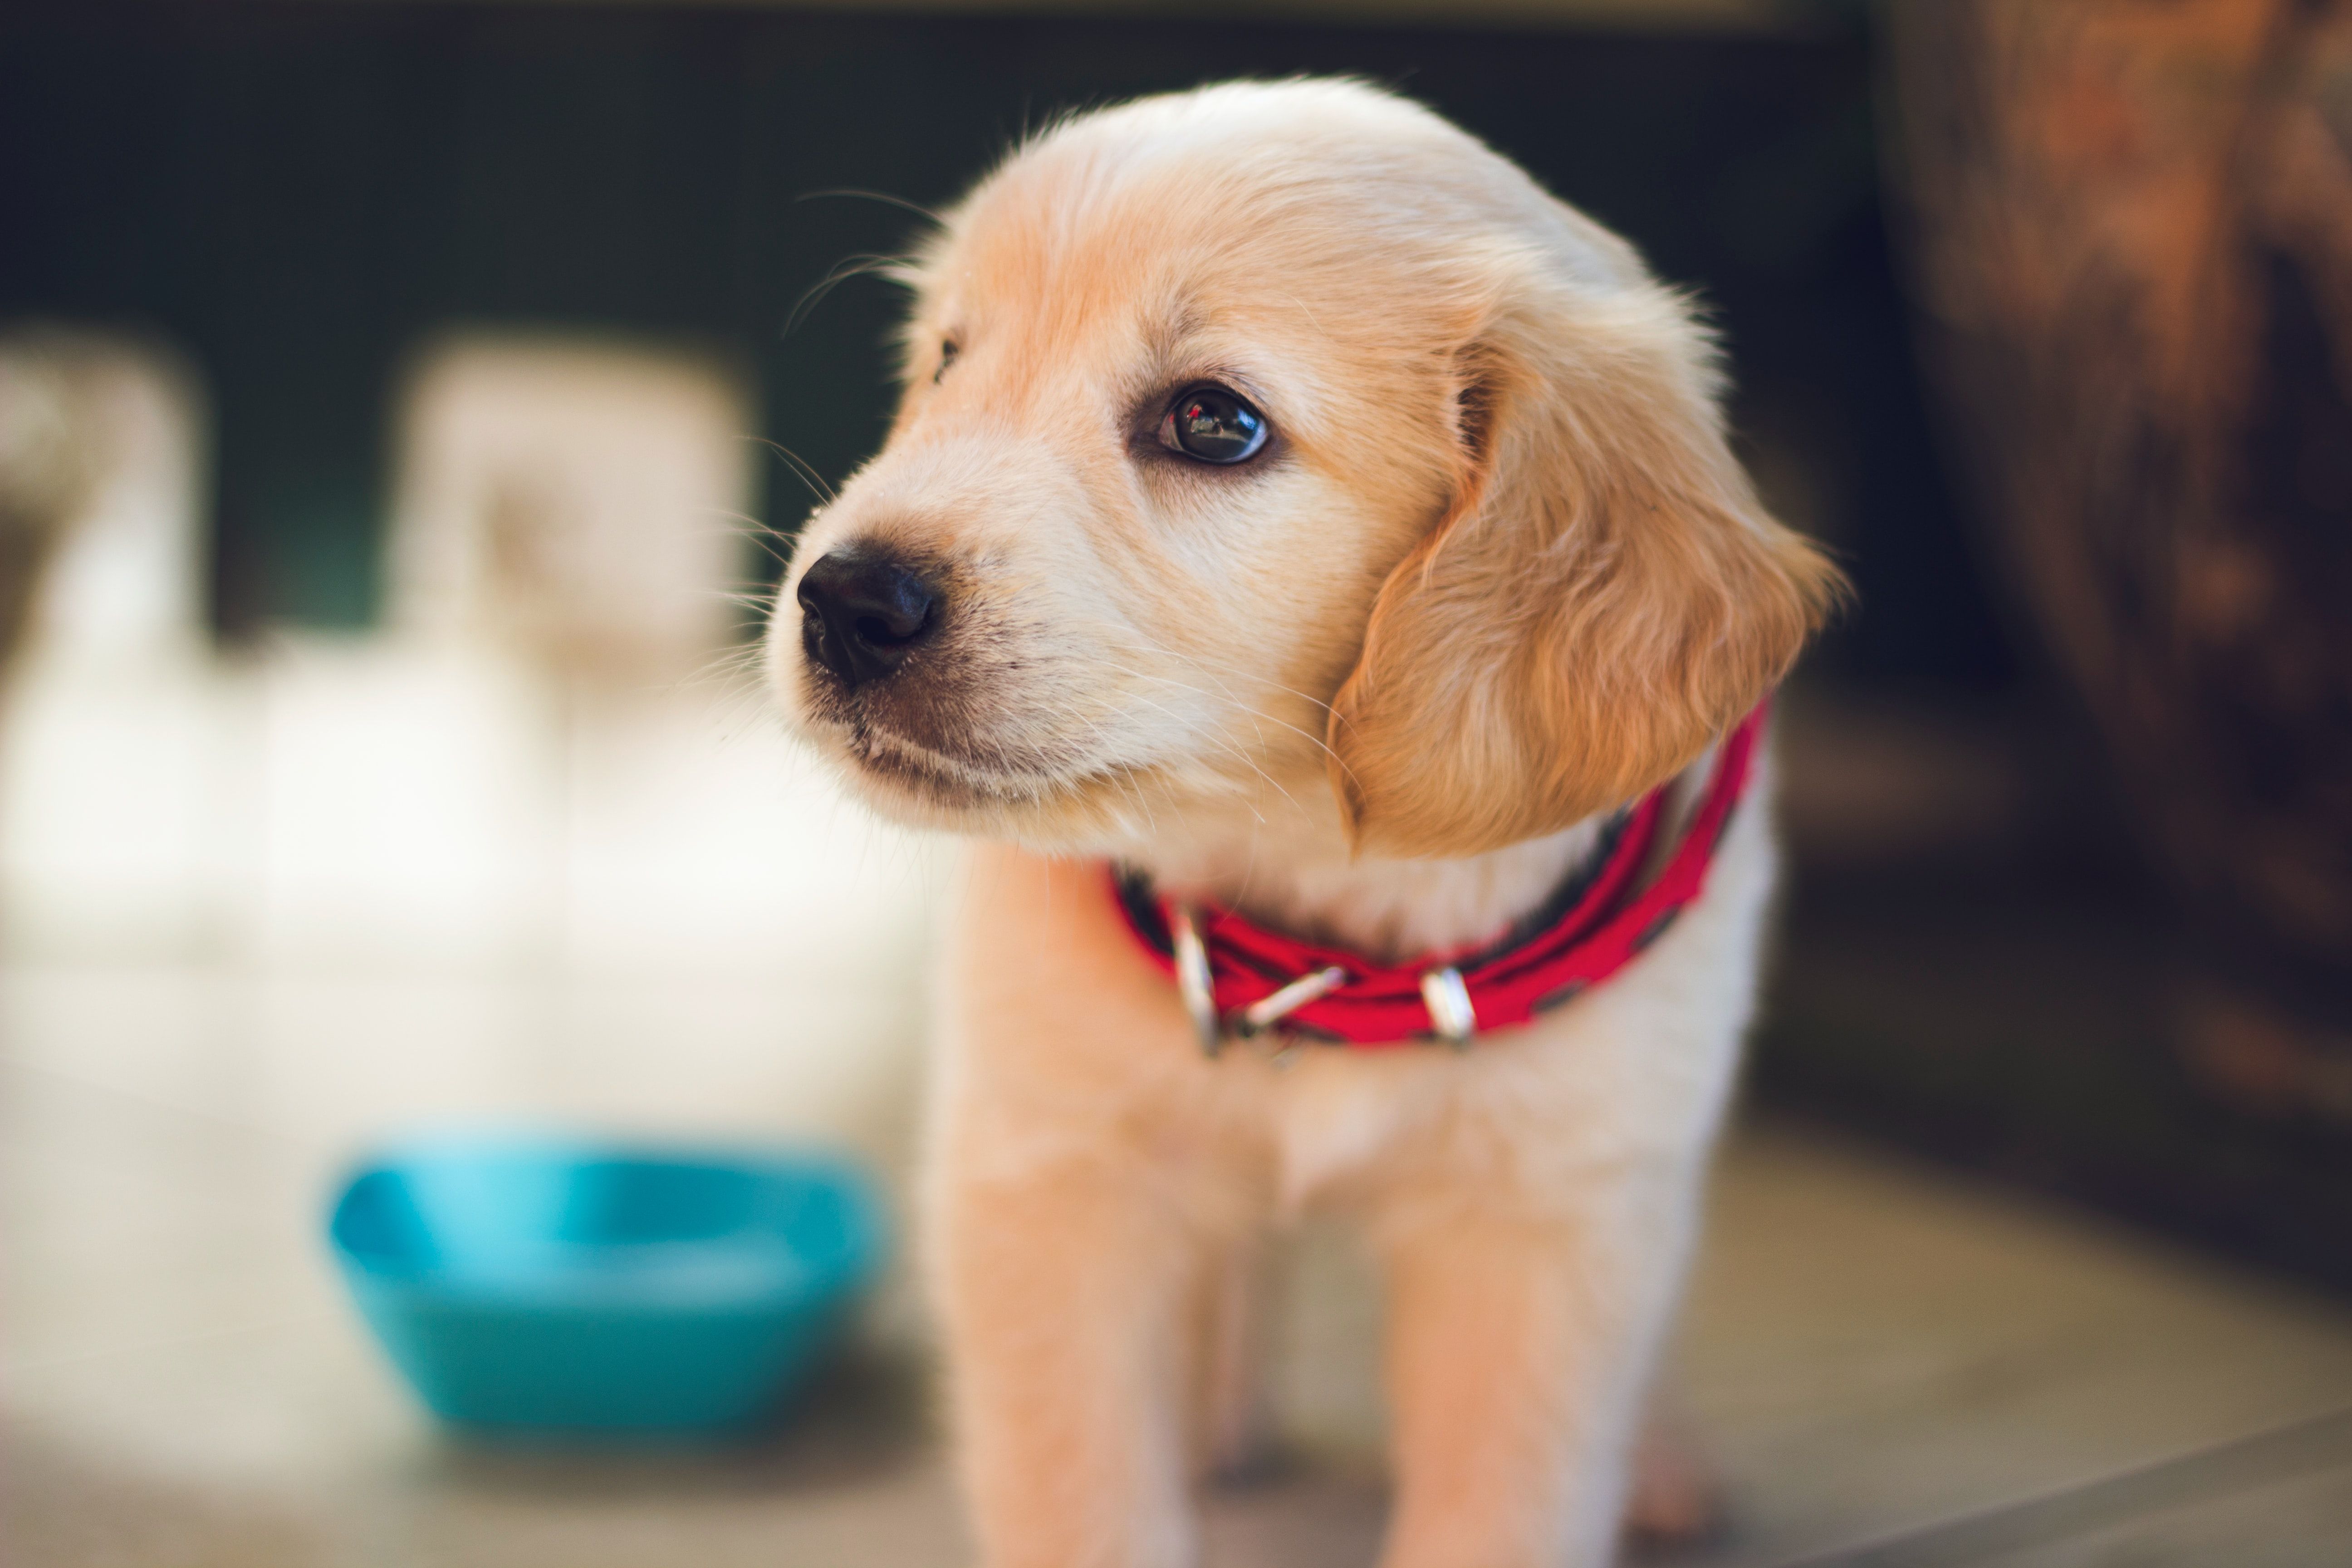 Puppy Wallpapers: Free HD Download [500+ HQ]